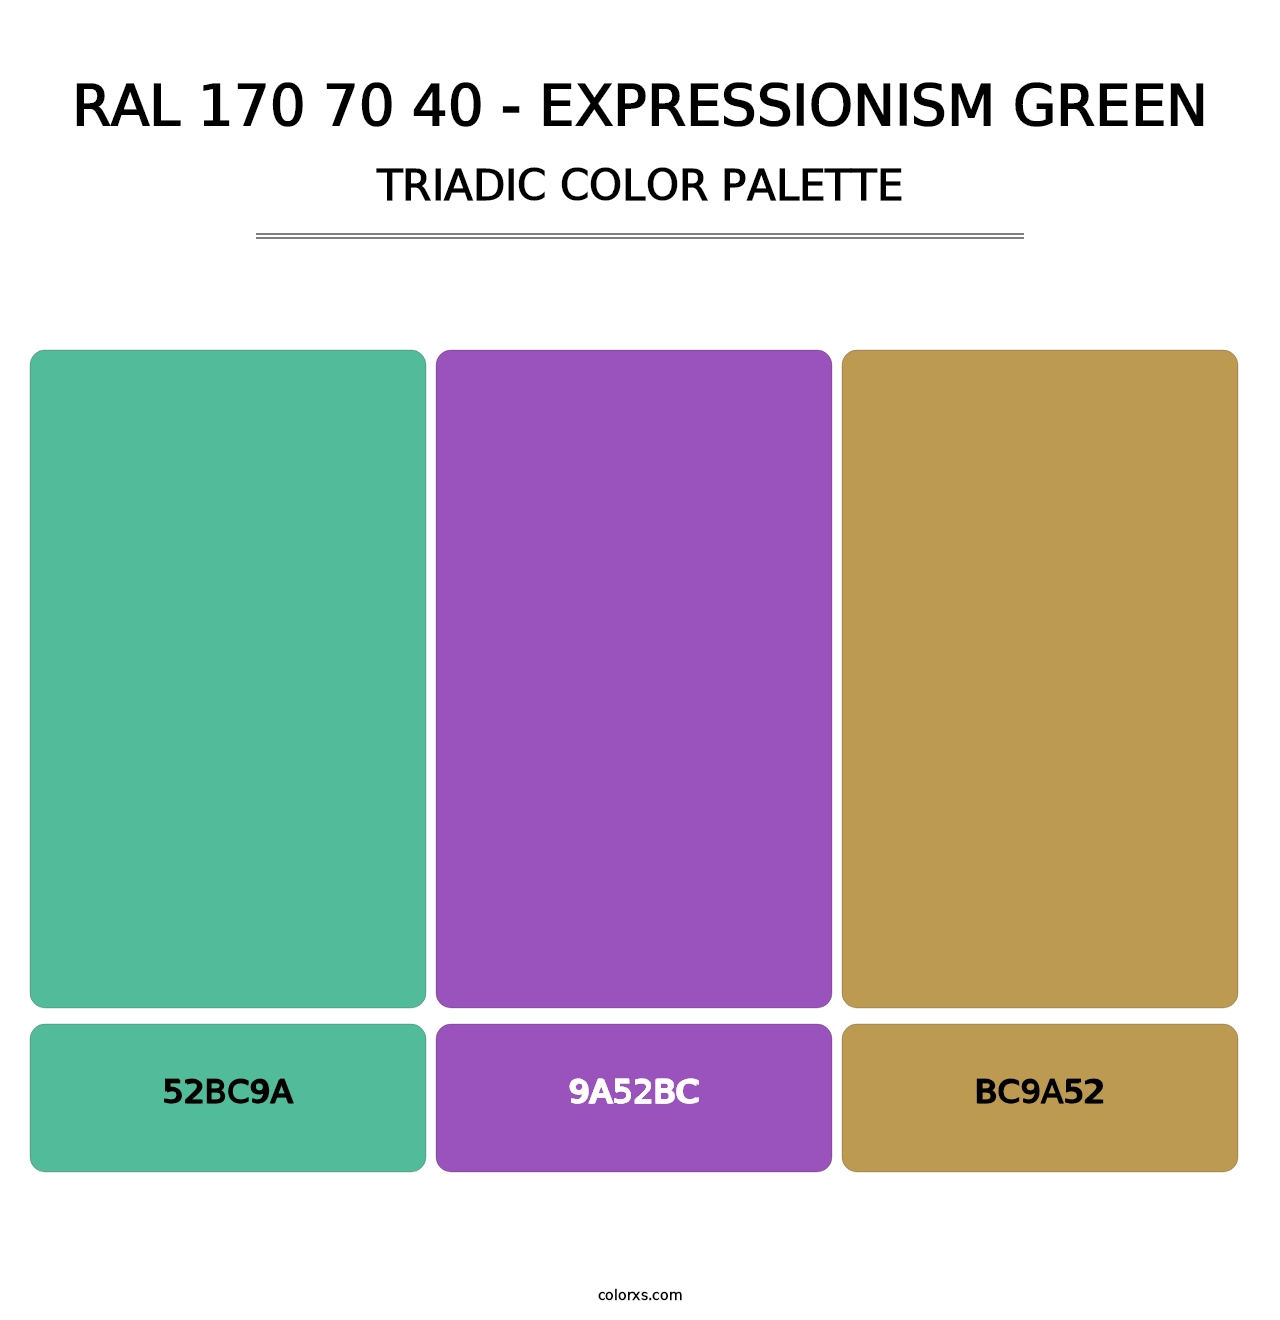 RAL 170 70 40 - Expressionism Green - Triadic Color Palette